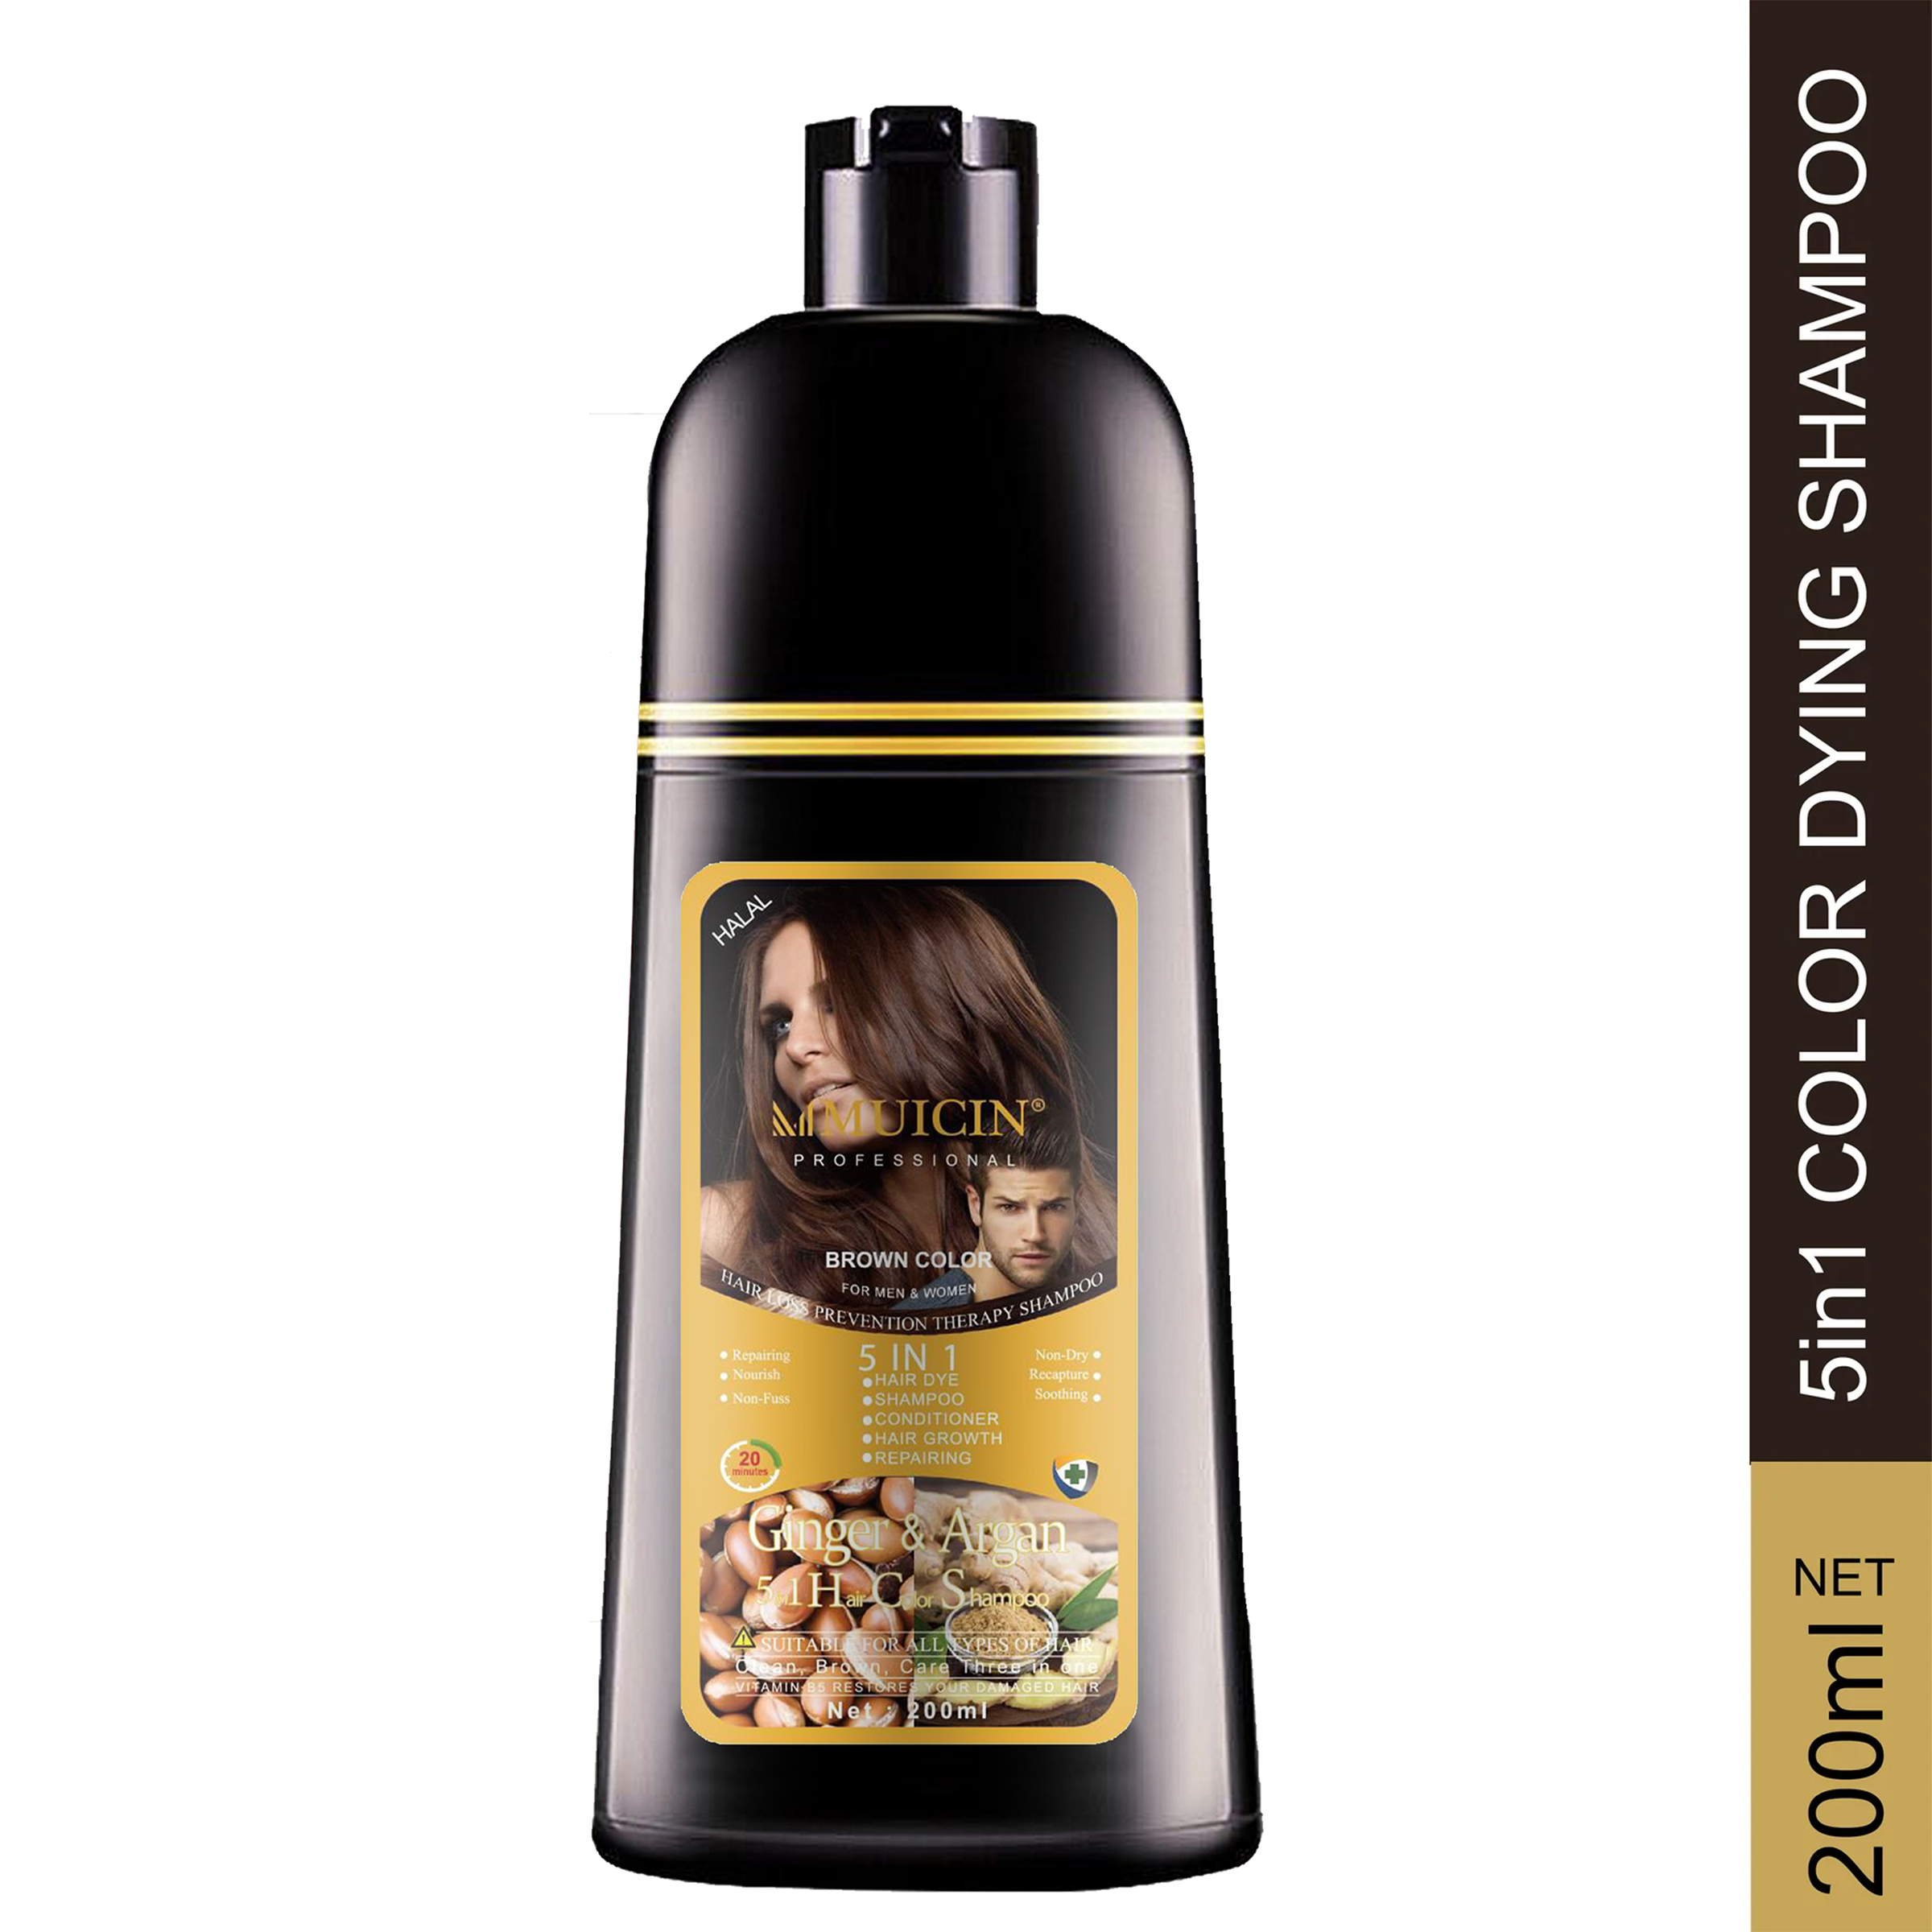 5 IN 1 HAIR COLOR SHAMPOO WITH GINGER &amp; ARGAN OIL - COLOR REFRESH &amp; REPAIR